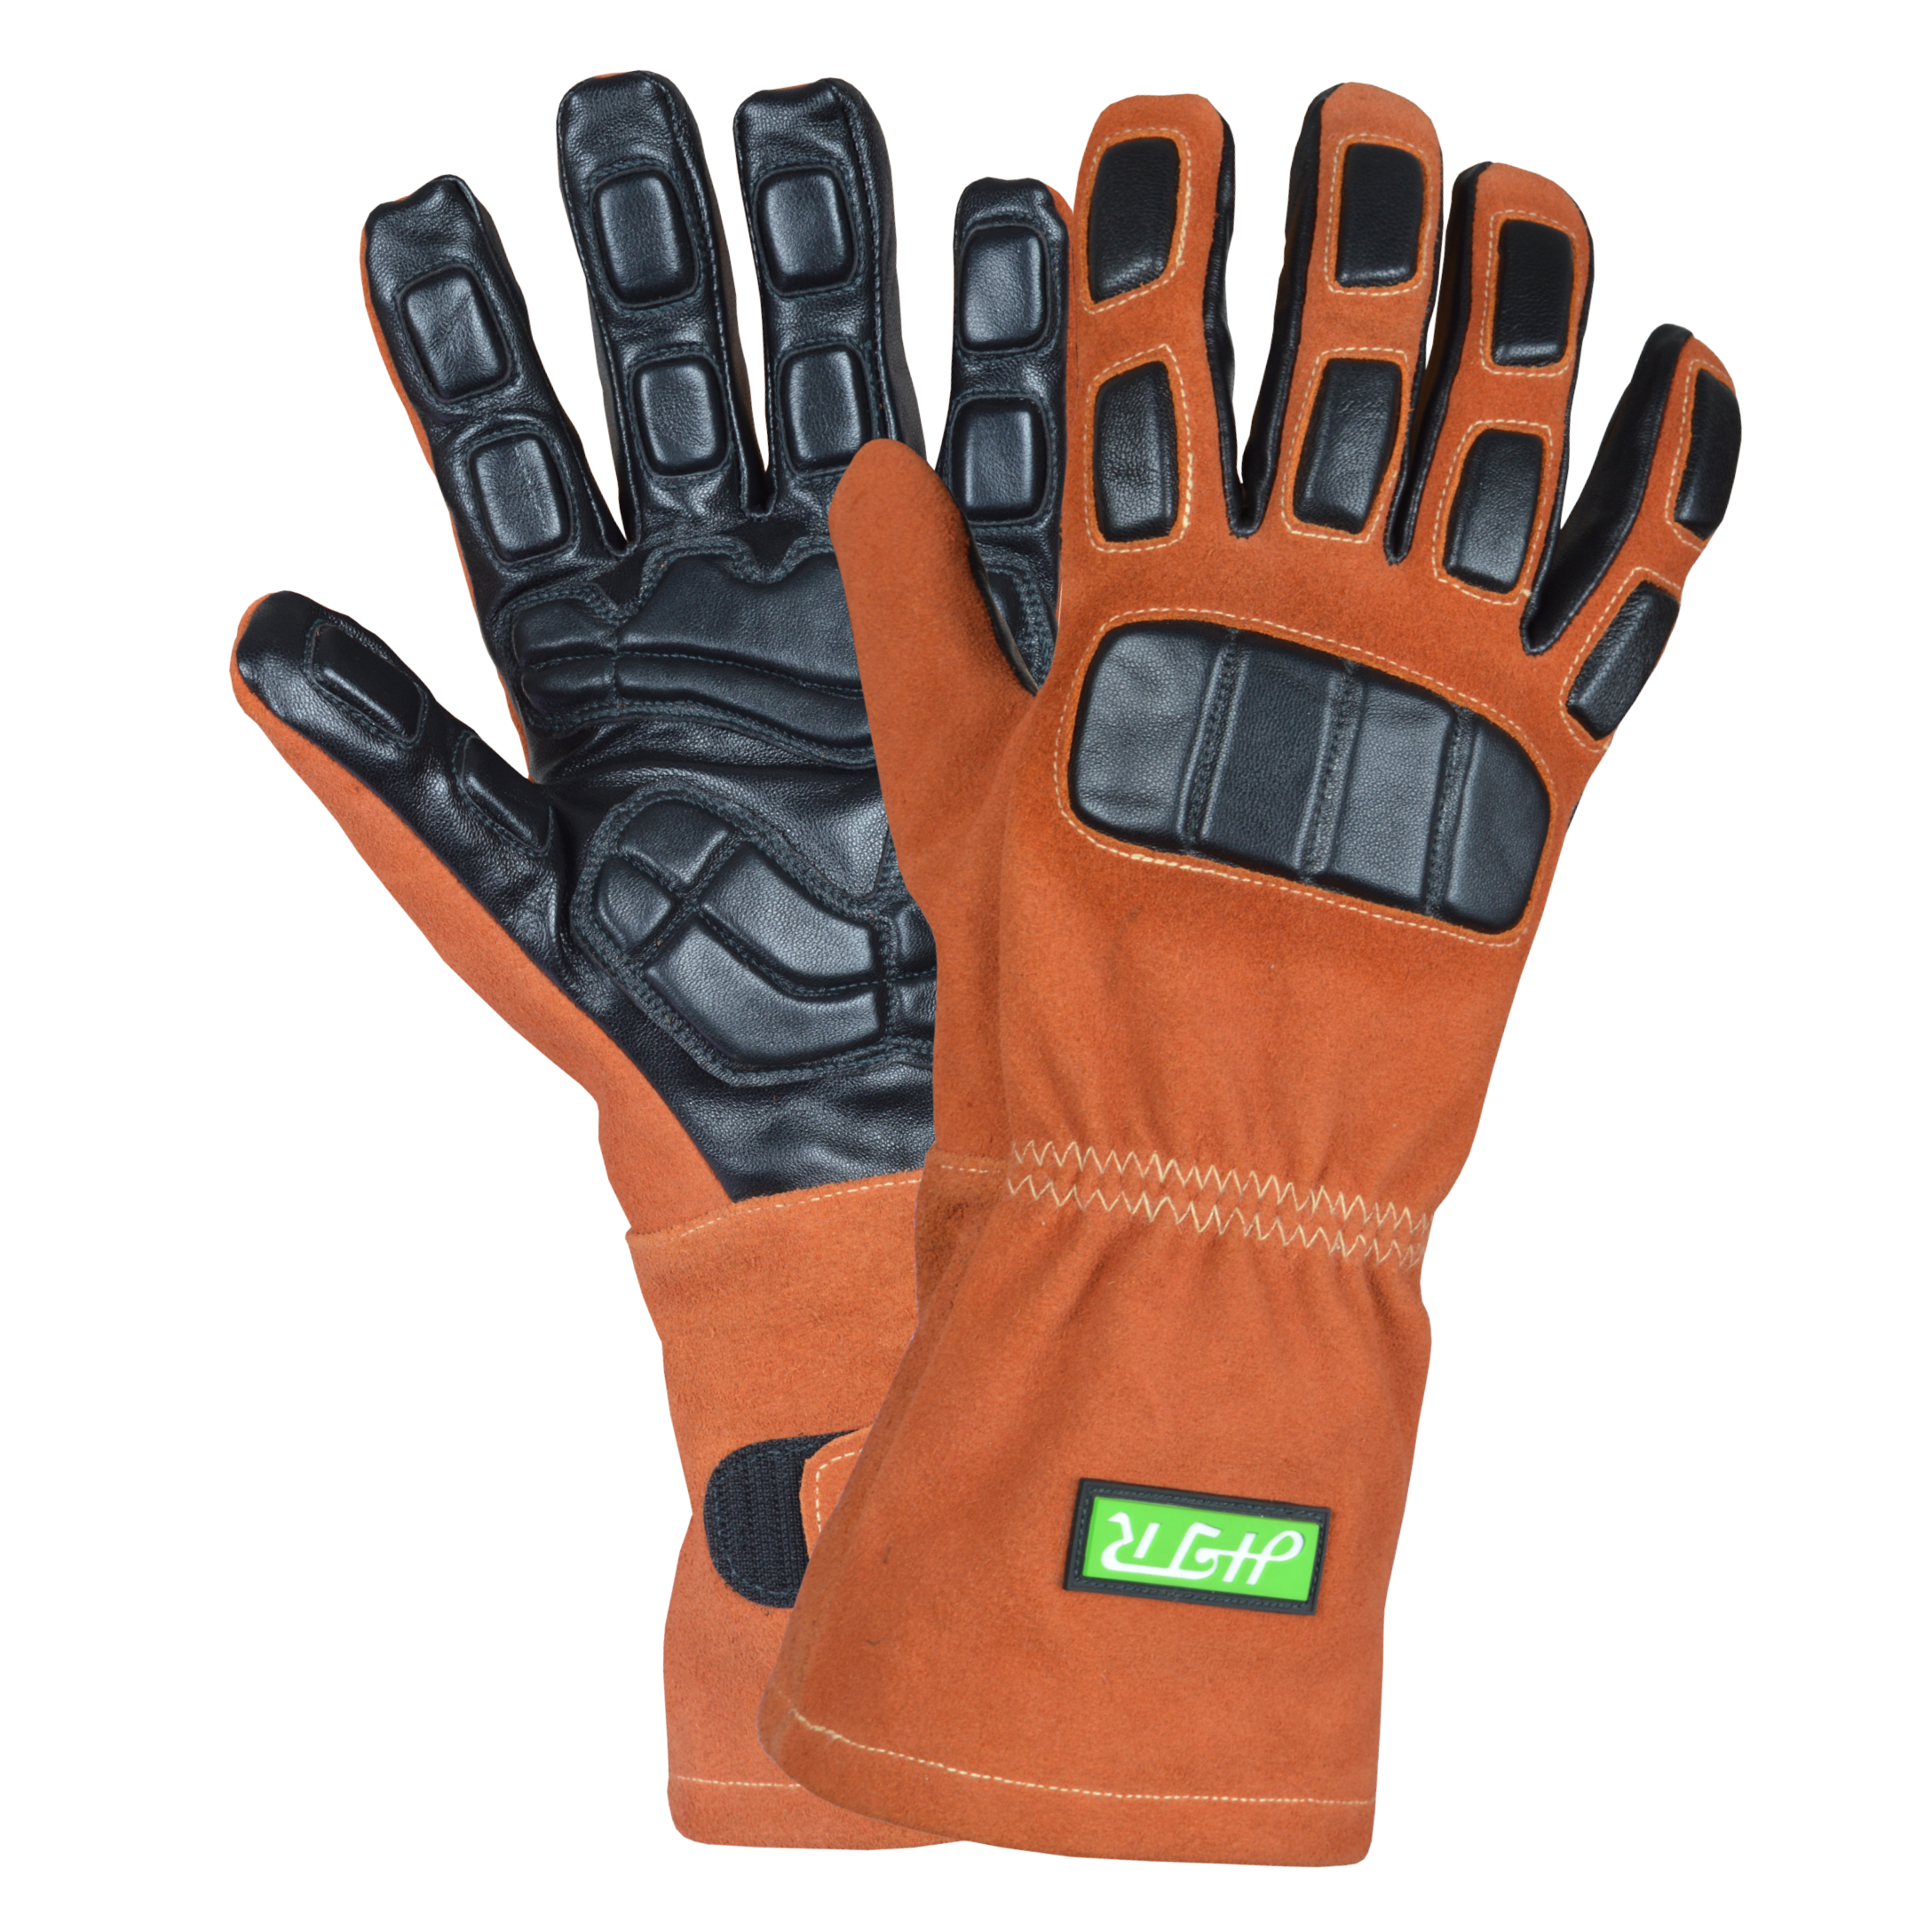 Anti-impact leather welding gloves